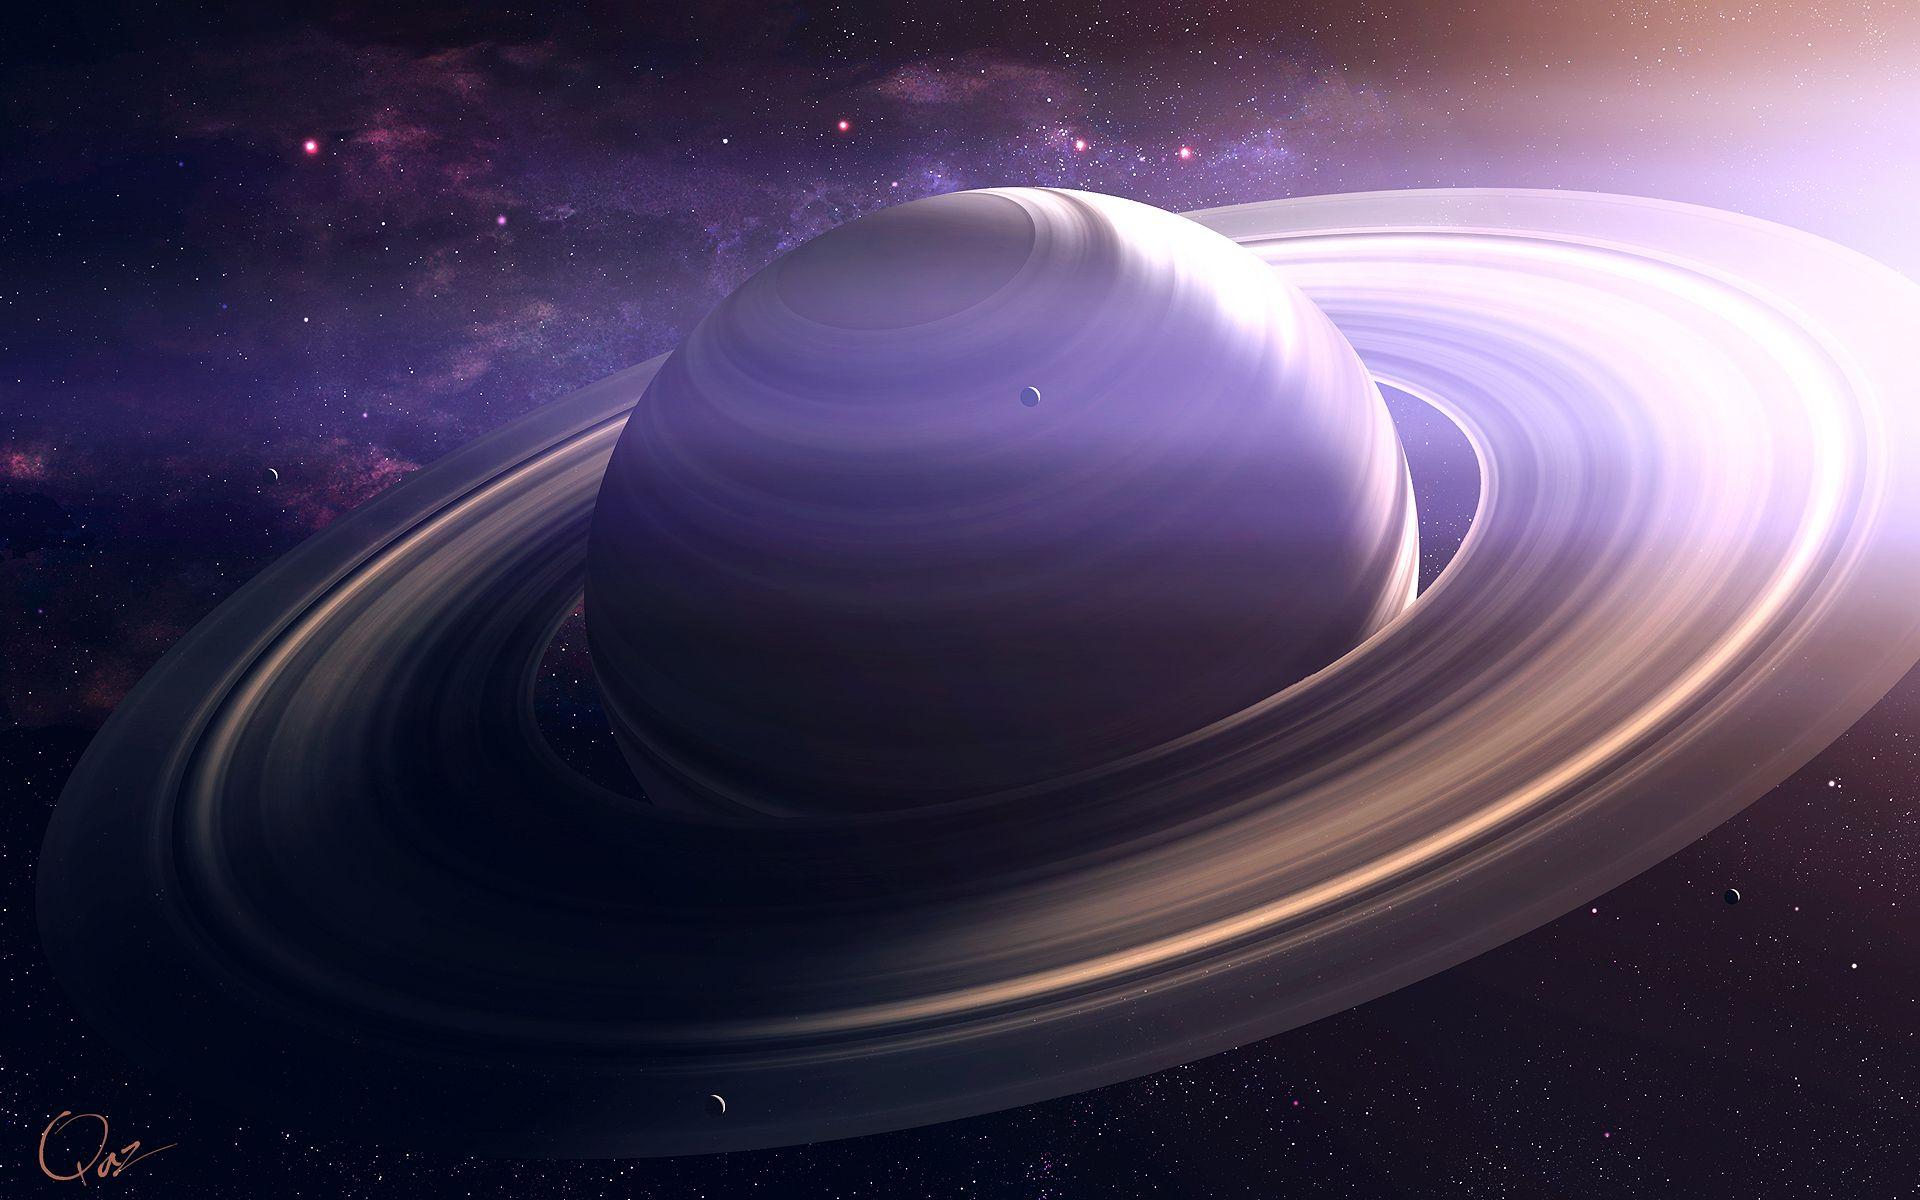 Download wallpaper 800x600 saturn, planet, round, space pocket pc, pda hd  background